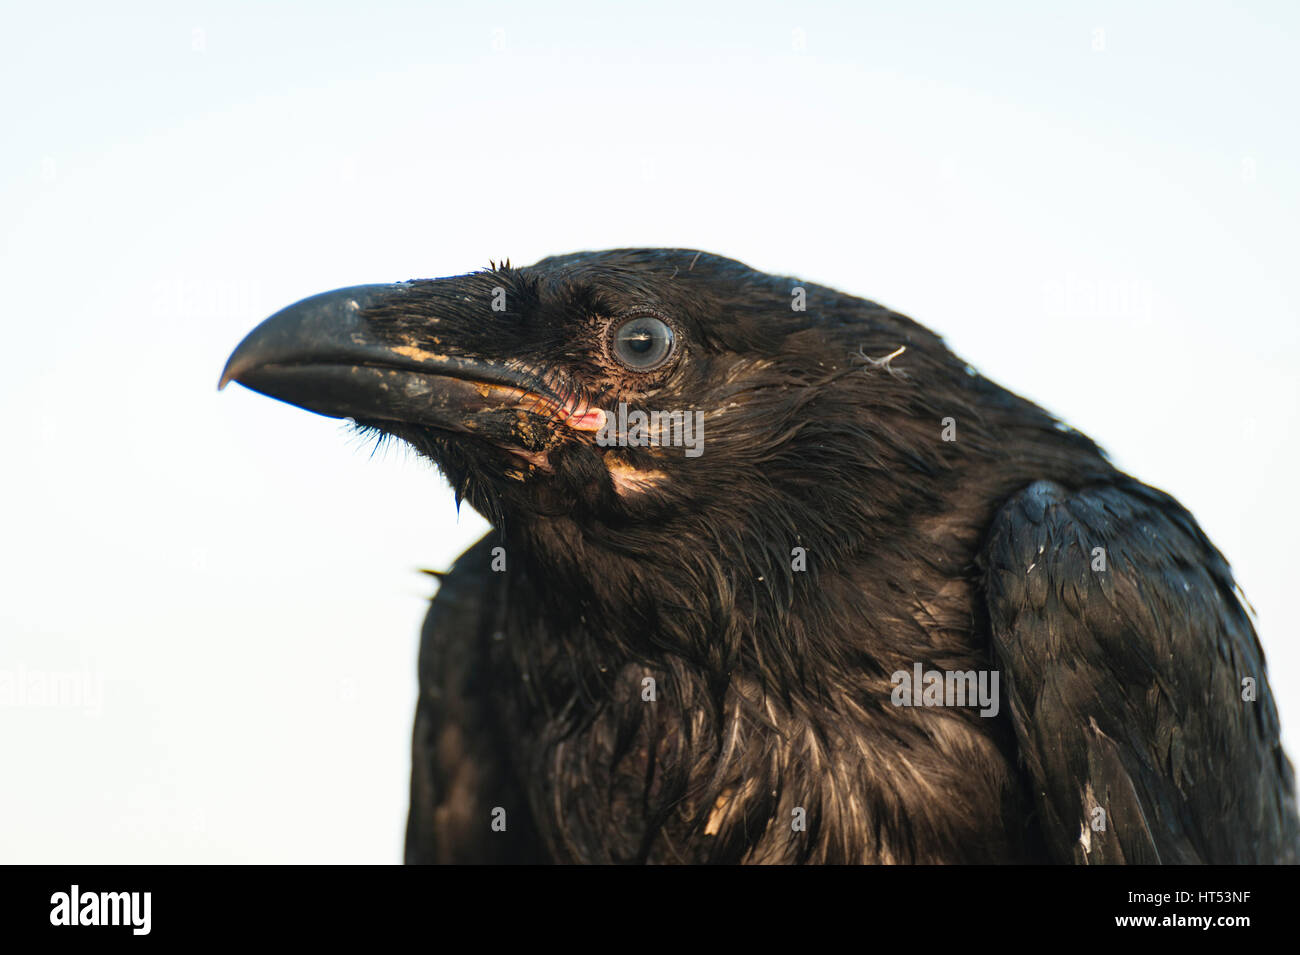 Juvenile Icelandic common raven (Corvus corax) with early / juvenile plumage looking at the camera. Stock Photo